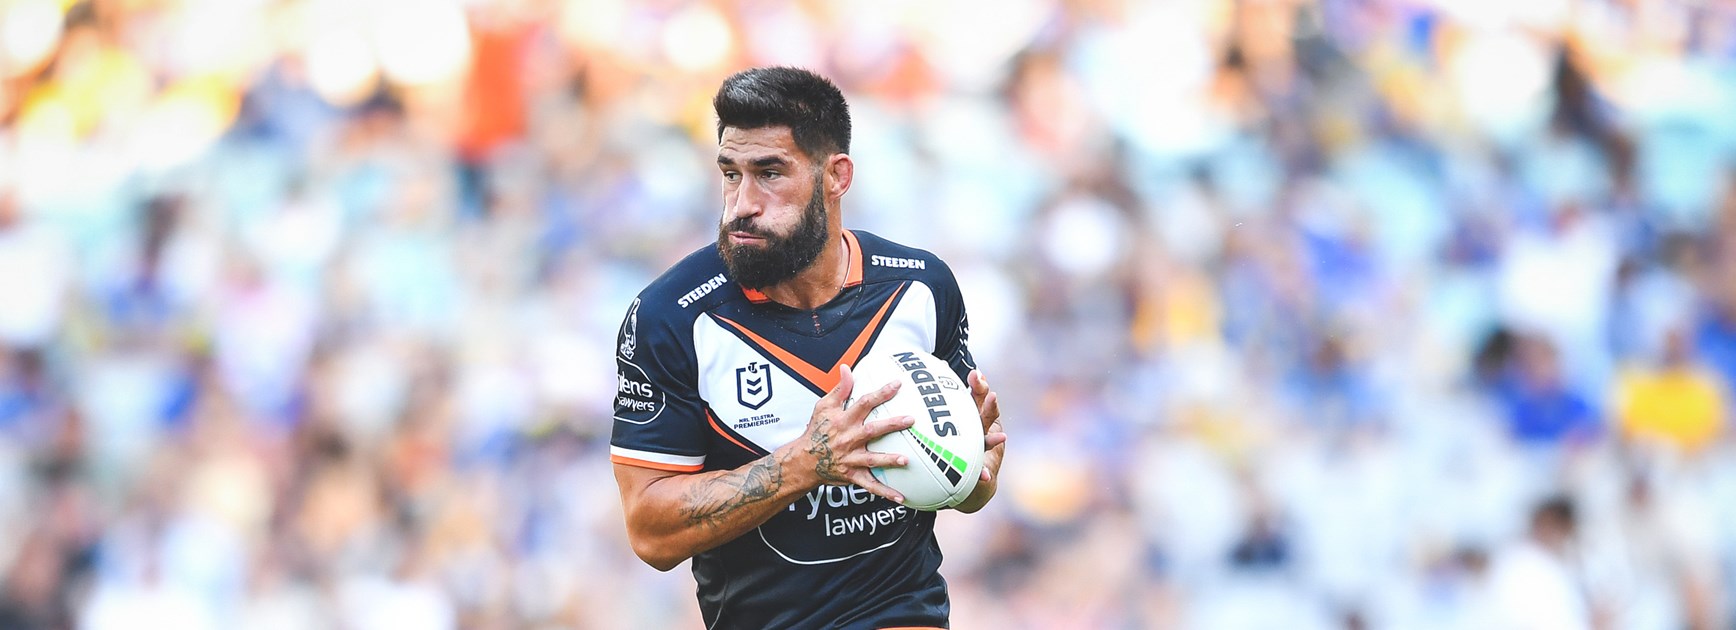 'It's on me': Tamou vows to provide more leadership for young Tigers